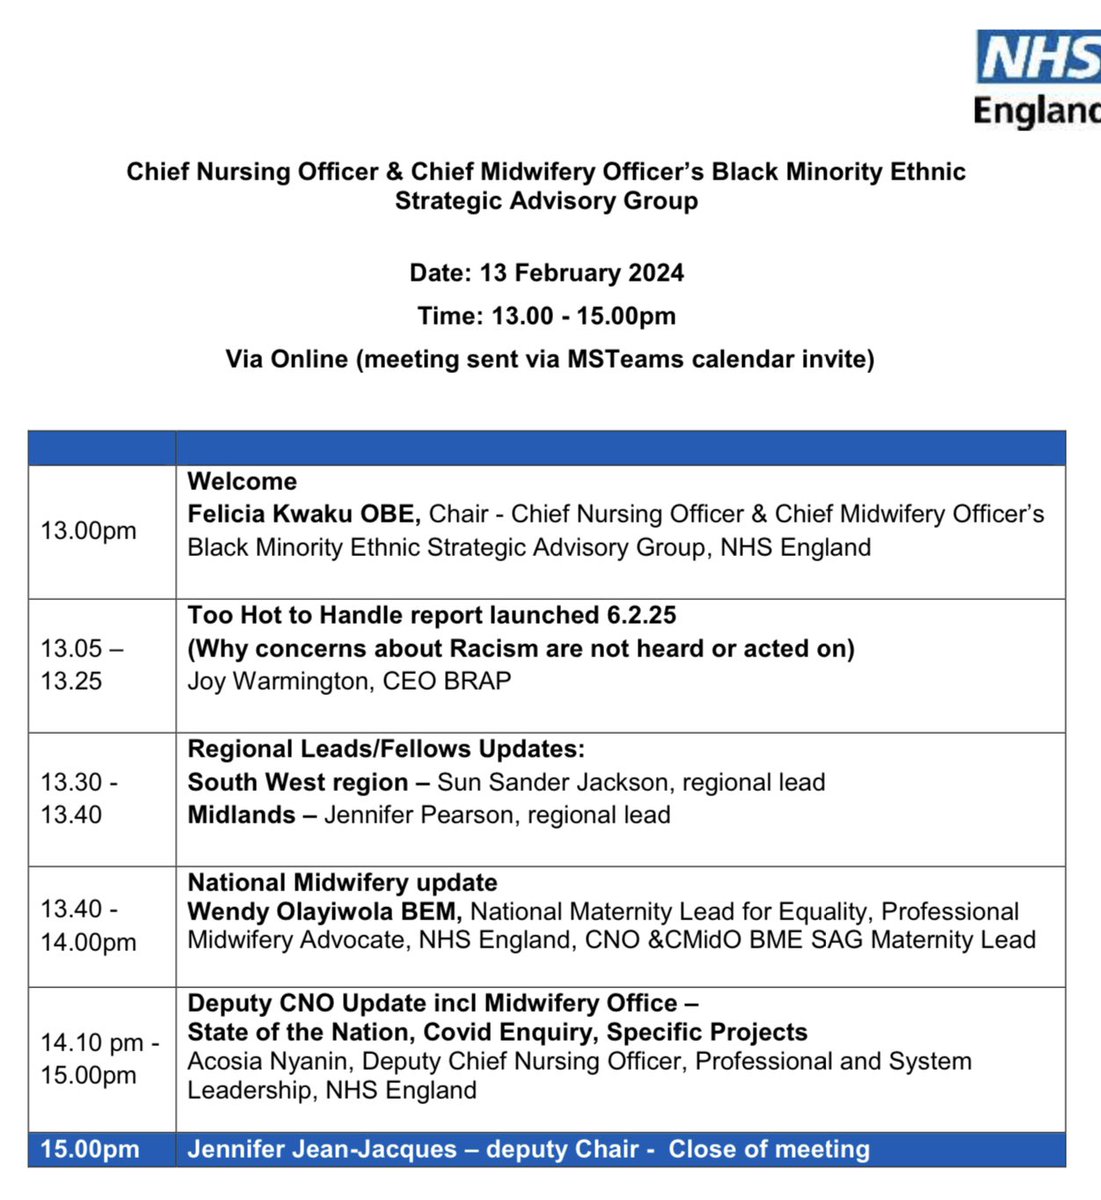 The next national meeting is on Tue 13 Feb 1024. 1-3pm. We’ll hear from regions @sunnysanderjac1 @JenniferJSP37 discuss the BRAP report “Too Hot to Handle” with @JWmusesthis National #Maternity update by @wendyolayiwola and hear national Nursing items from Dep CNO @AcosiaNyanin